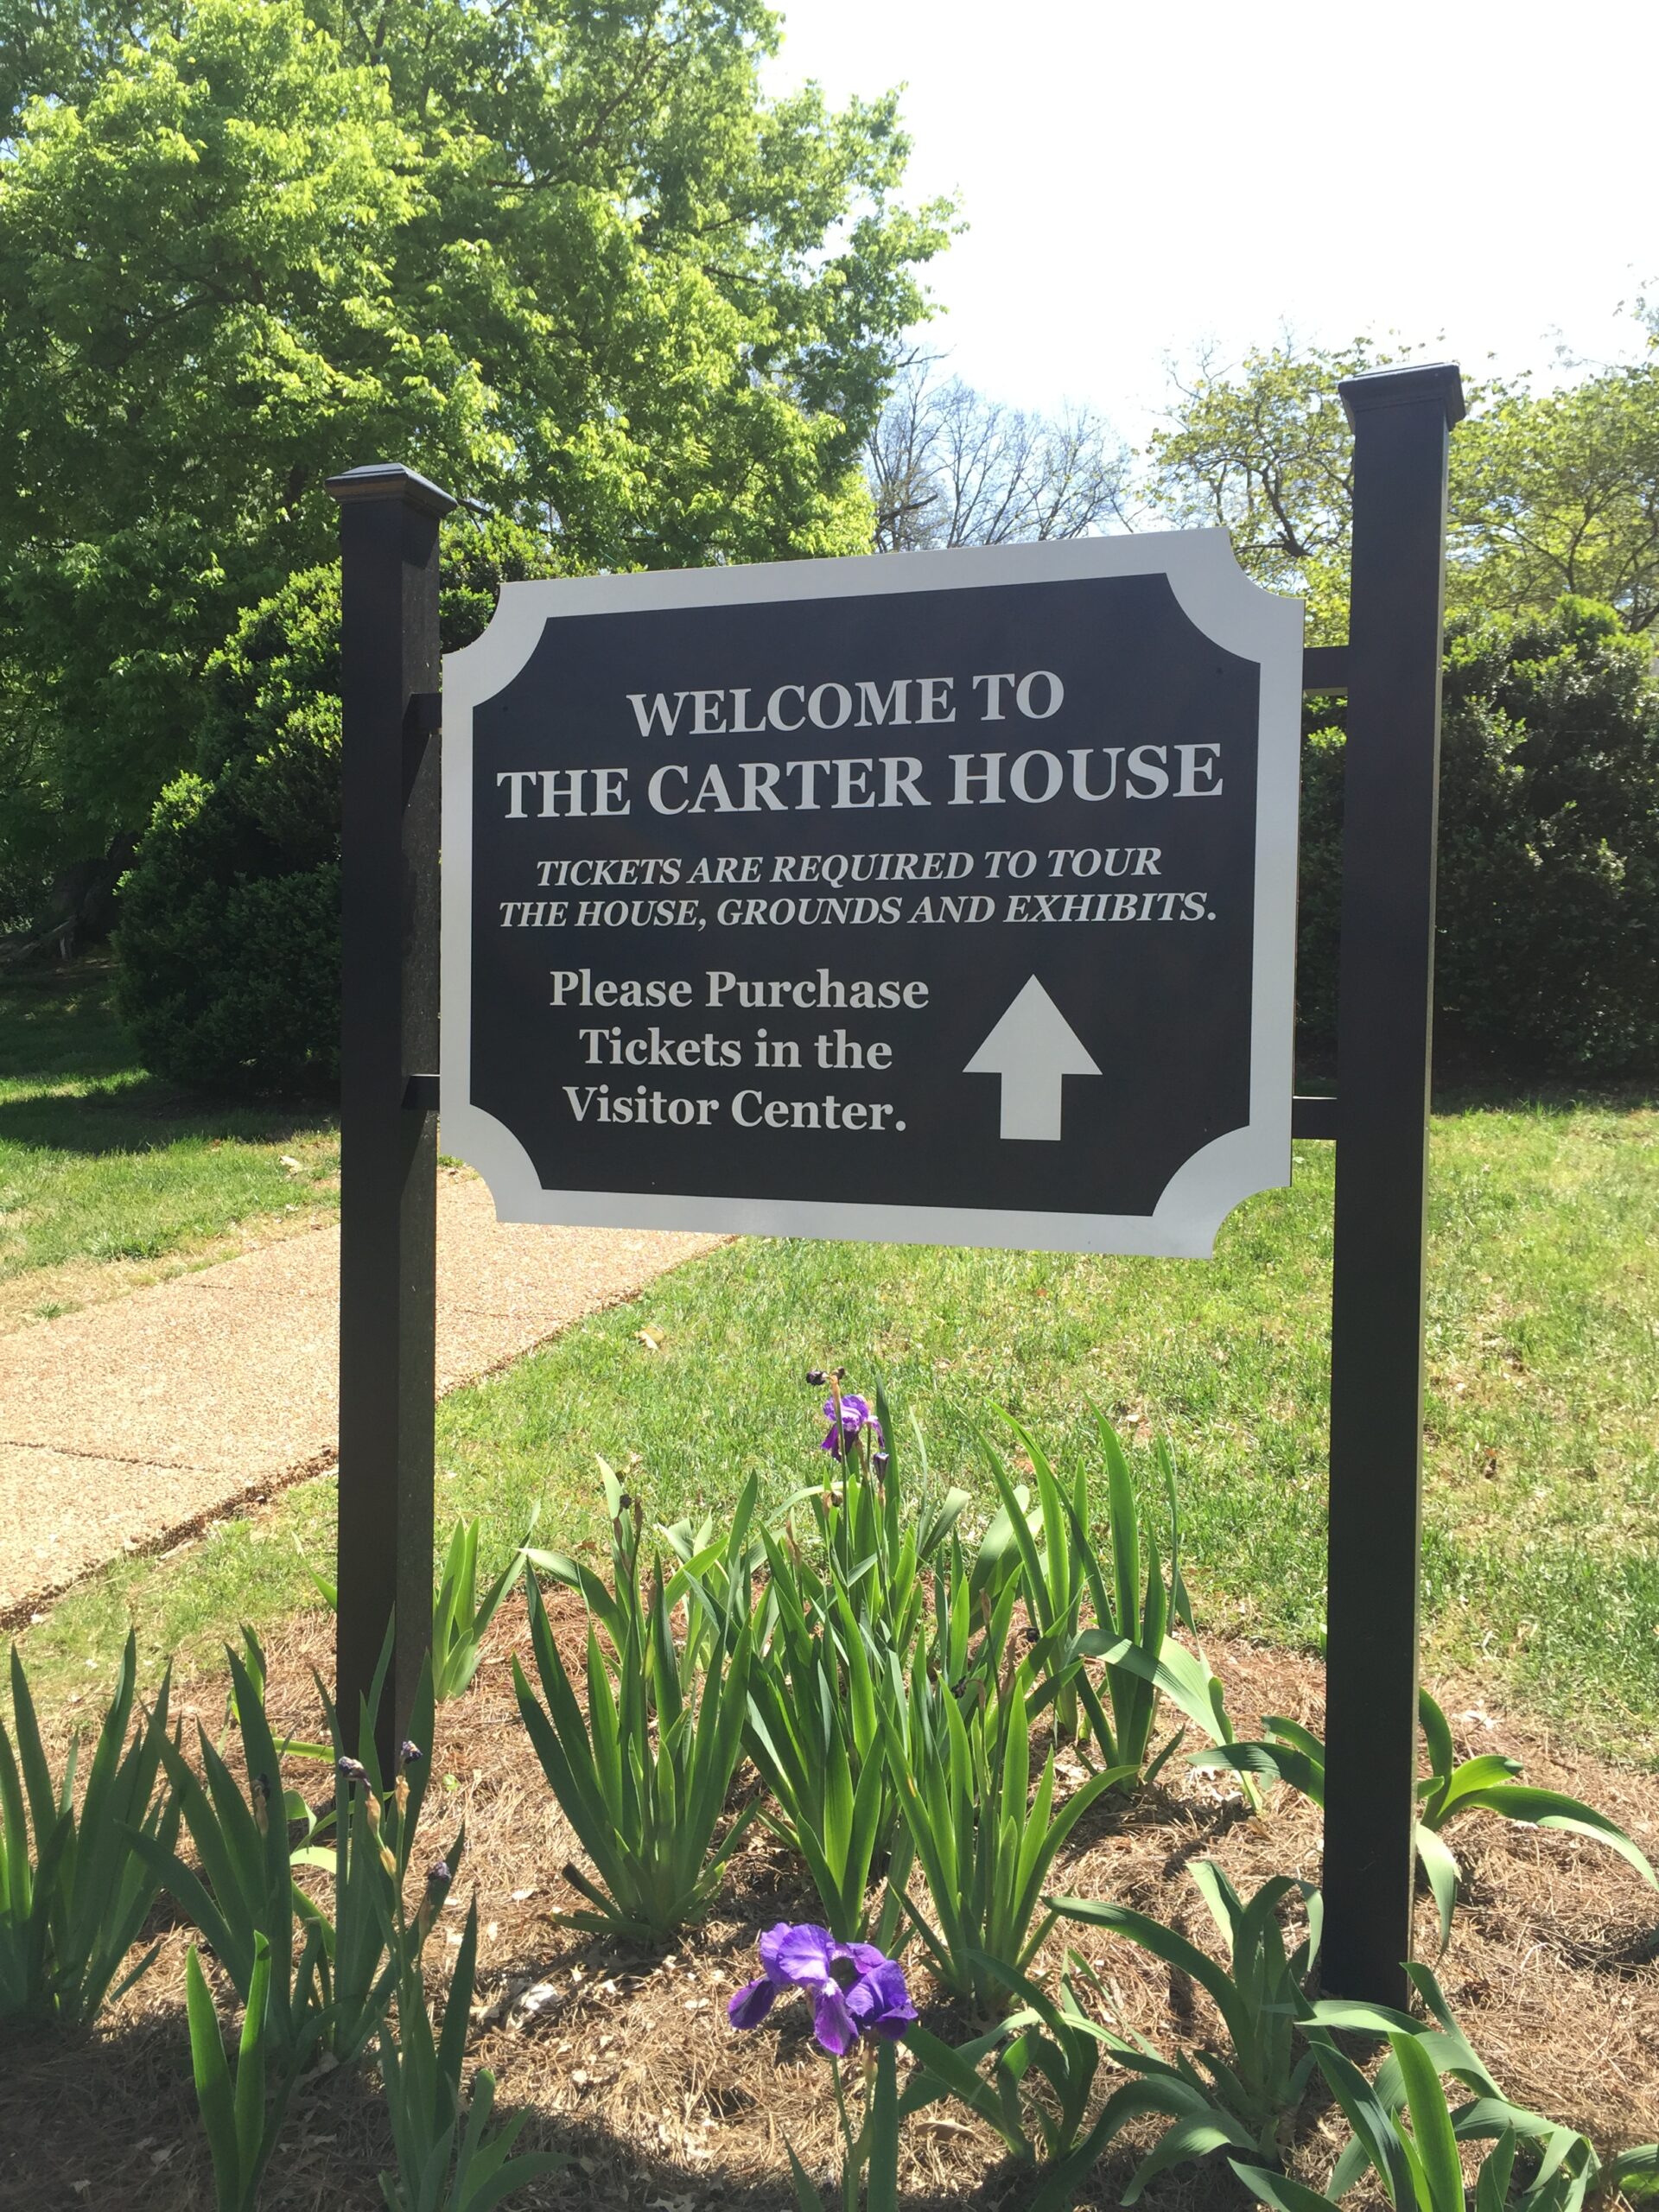 Previous Wayfinding Sign for the Carter House installed by 12-Point SignWorks